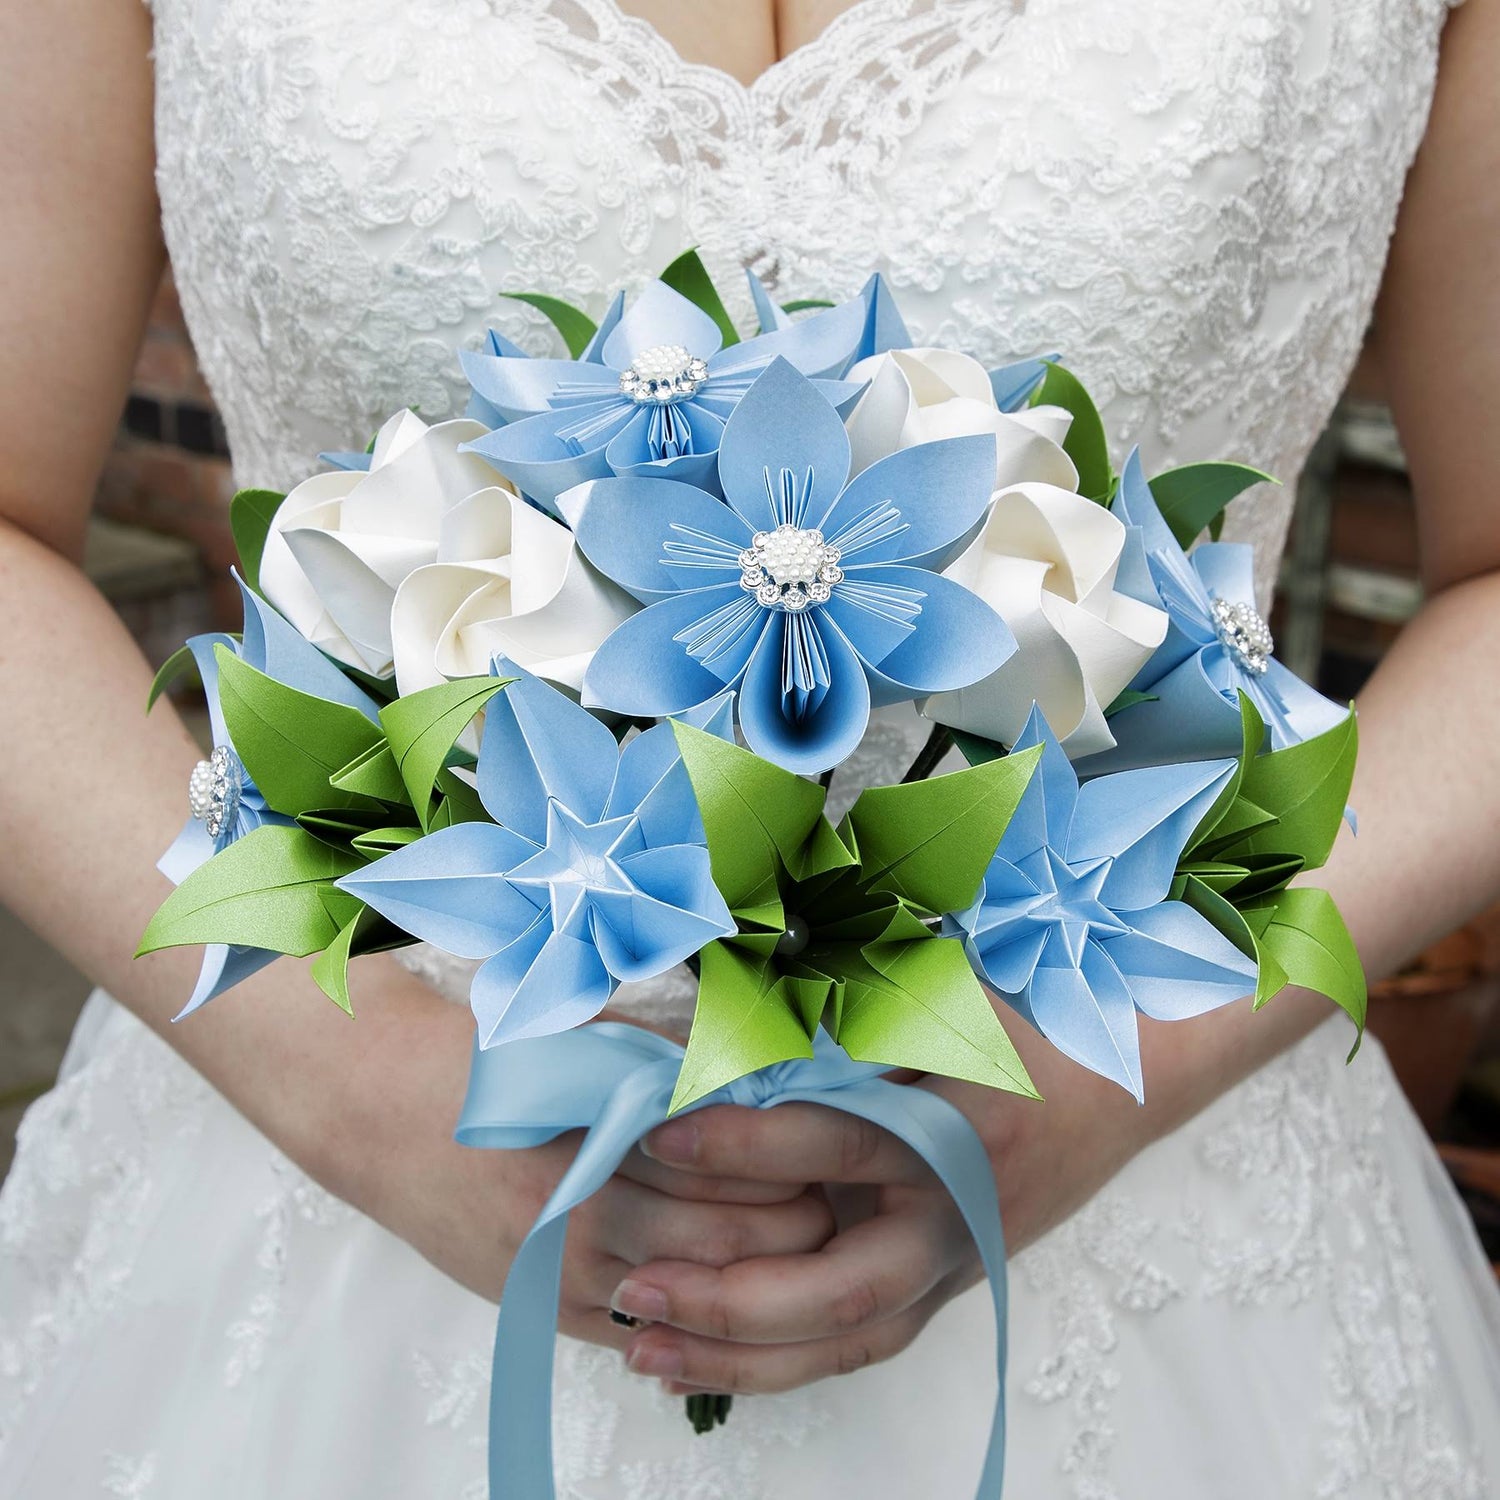 Origami wedding bouquet with sunflowers